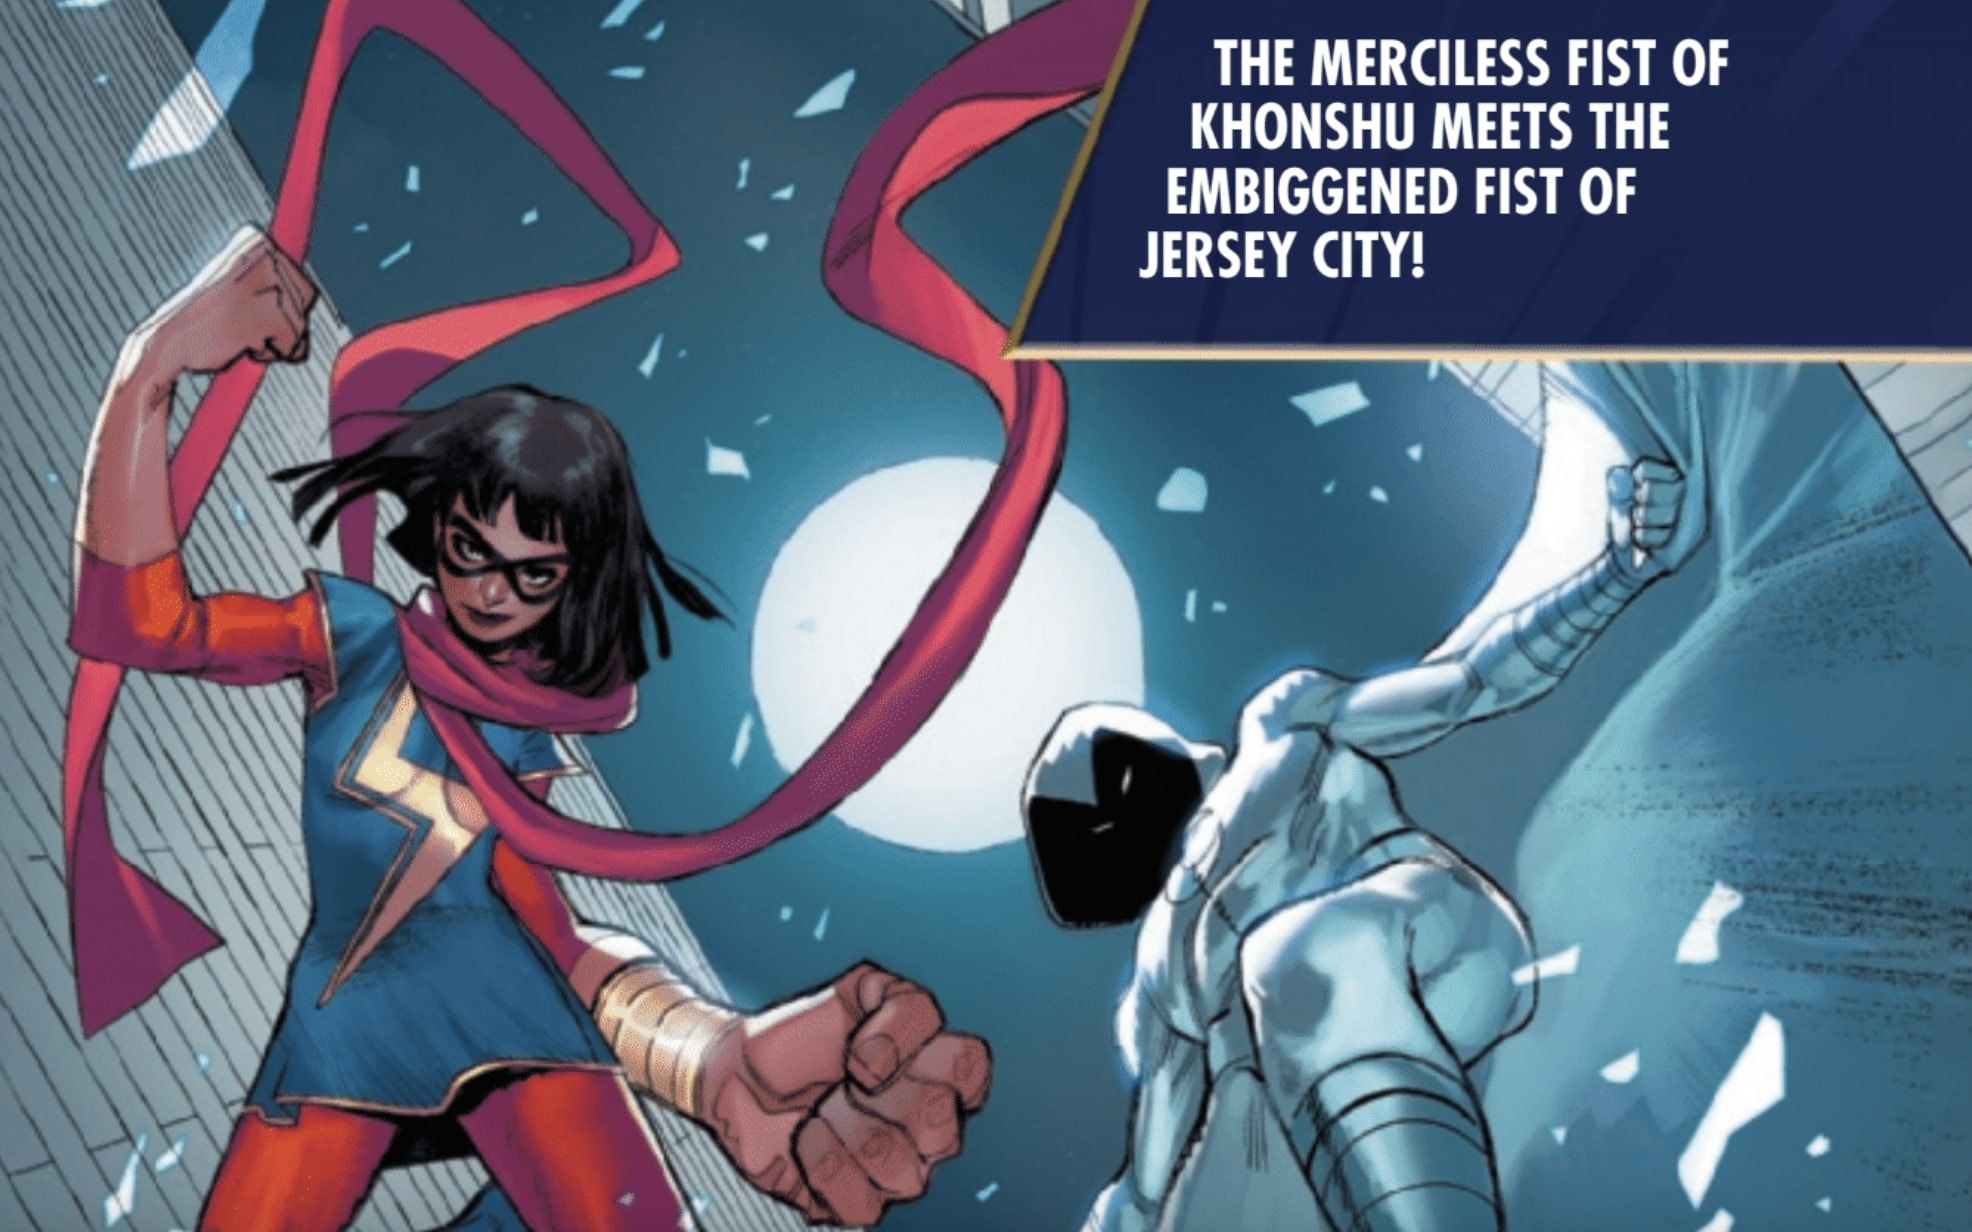 Ms Marvel team-up with Moon Knight advertisement: "The merciless fist of Khonshu meets the embiggened fist of Jersey City." Yes.